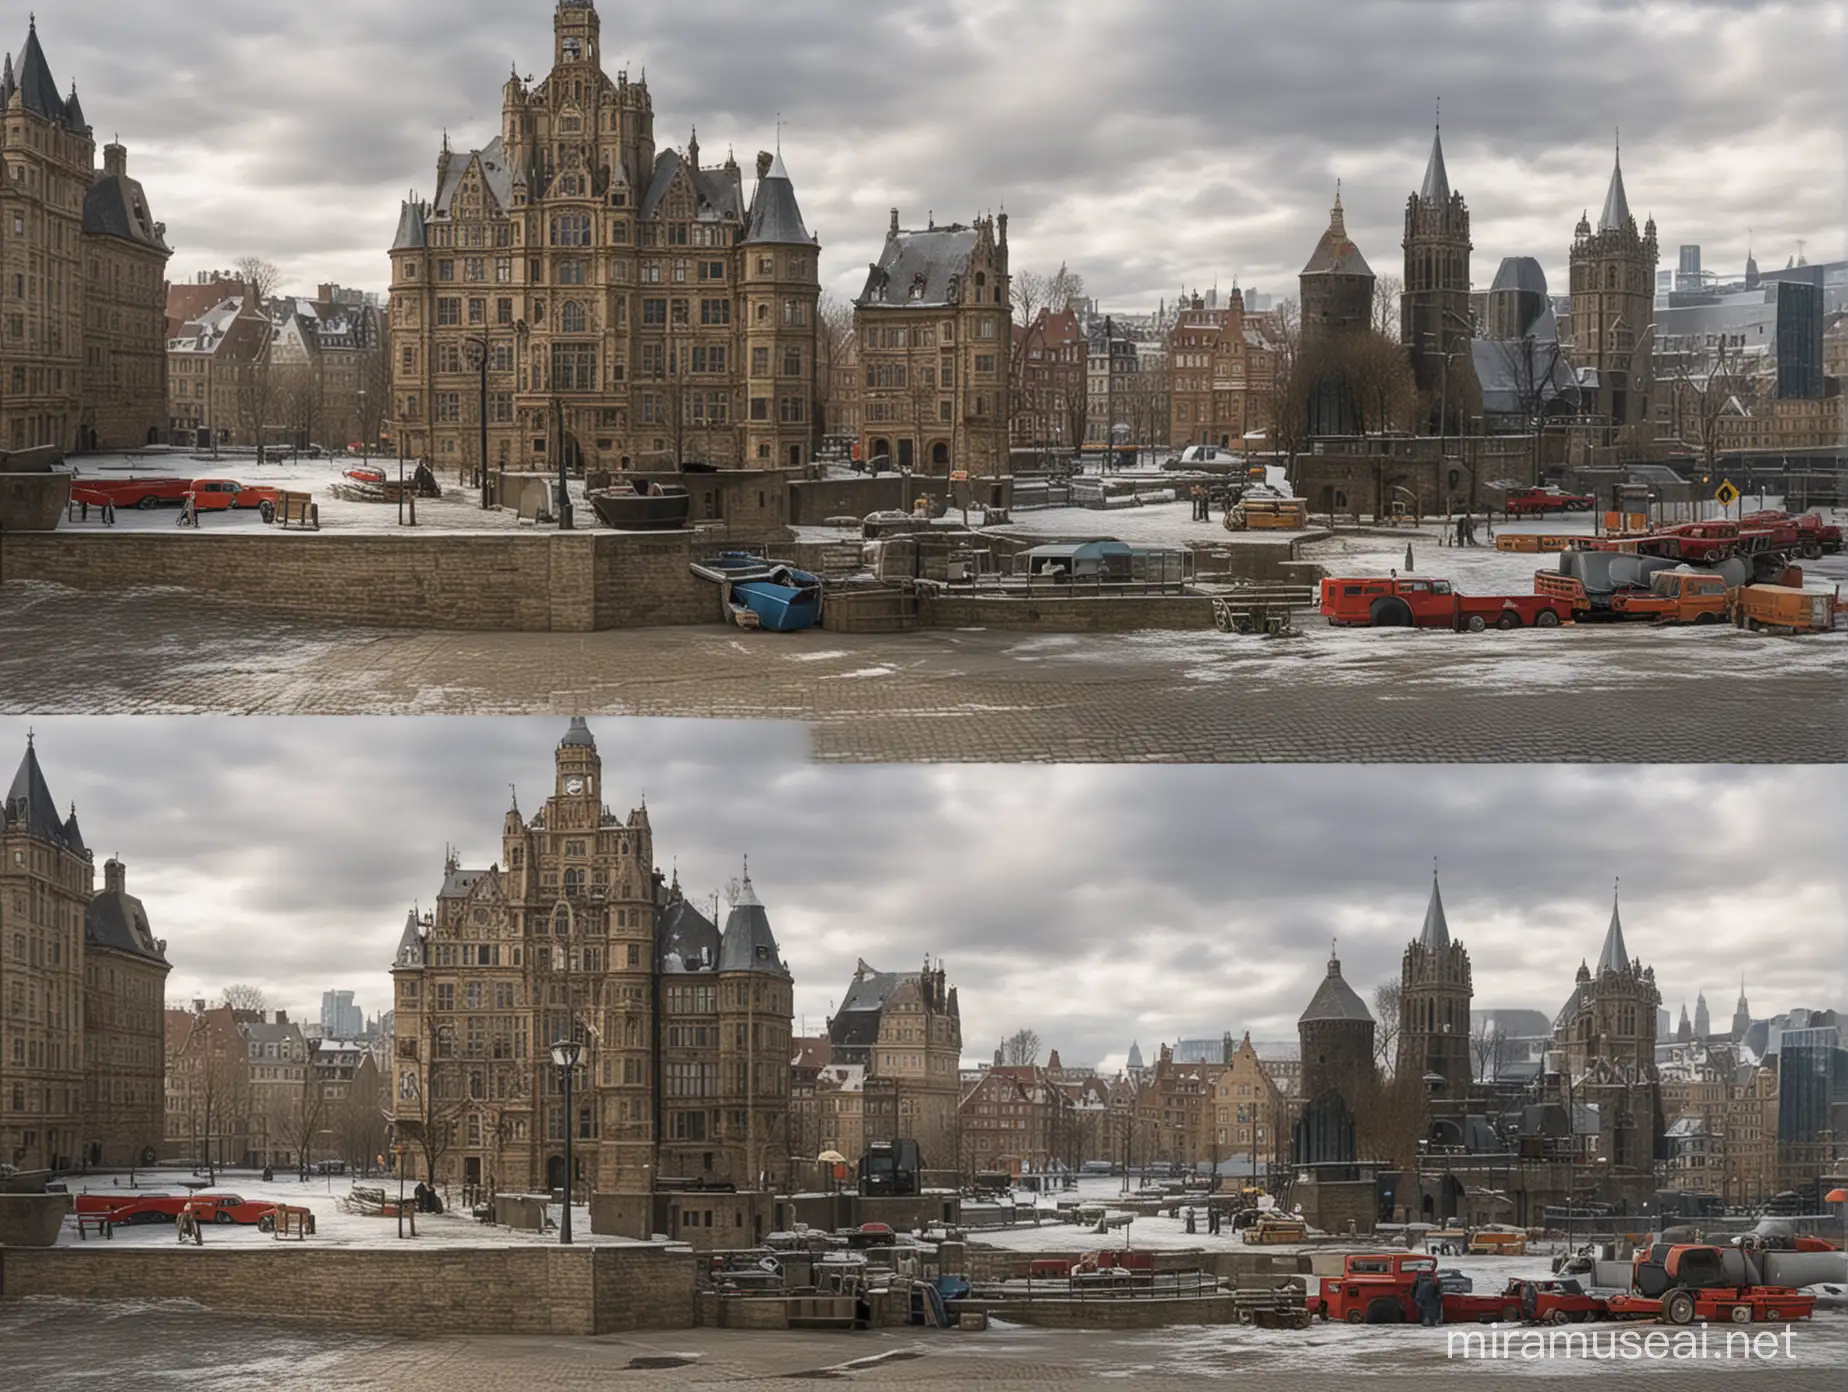 Generate two similar images with minor differences between them. Each image should show an interesting scene like a landscape, cityscape, or indoor setting. Make sure the differences are subtle but noticeable, with a maximum of three differences between the two images. The challenge is for players to find all the discrepancies, keeping them engaged and rewarded for their observation skills